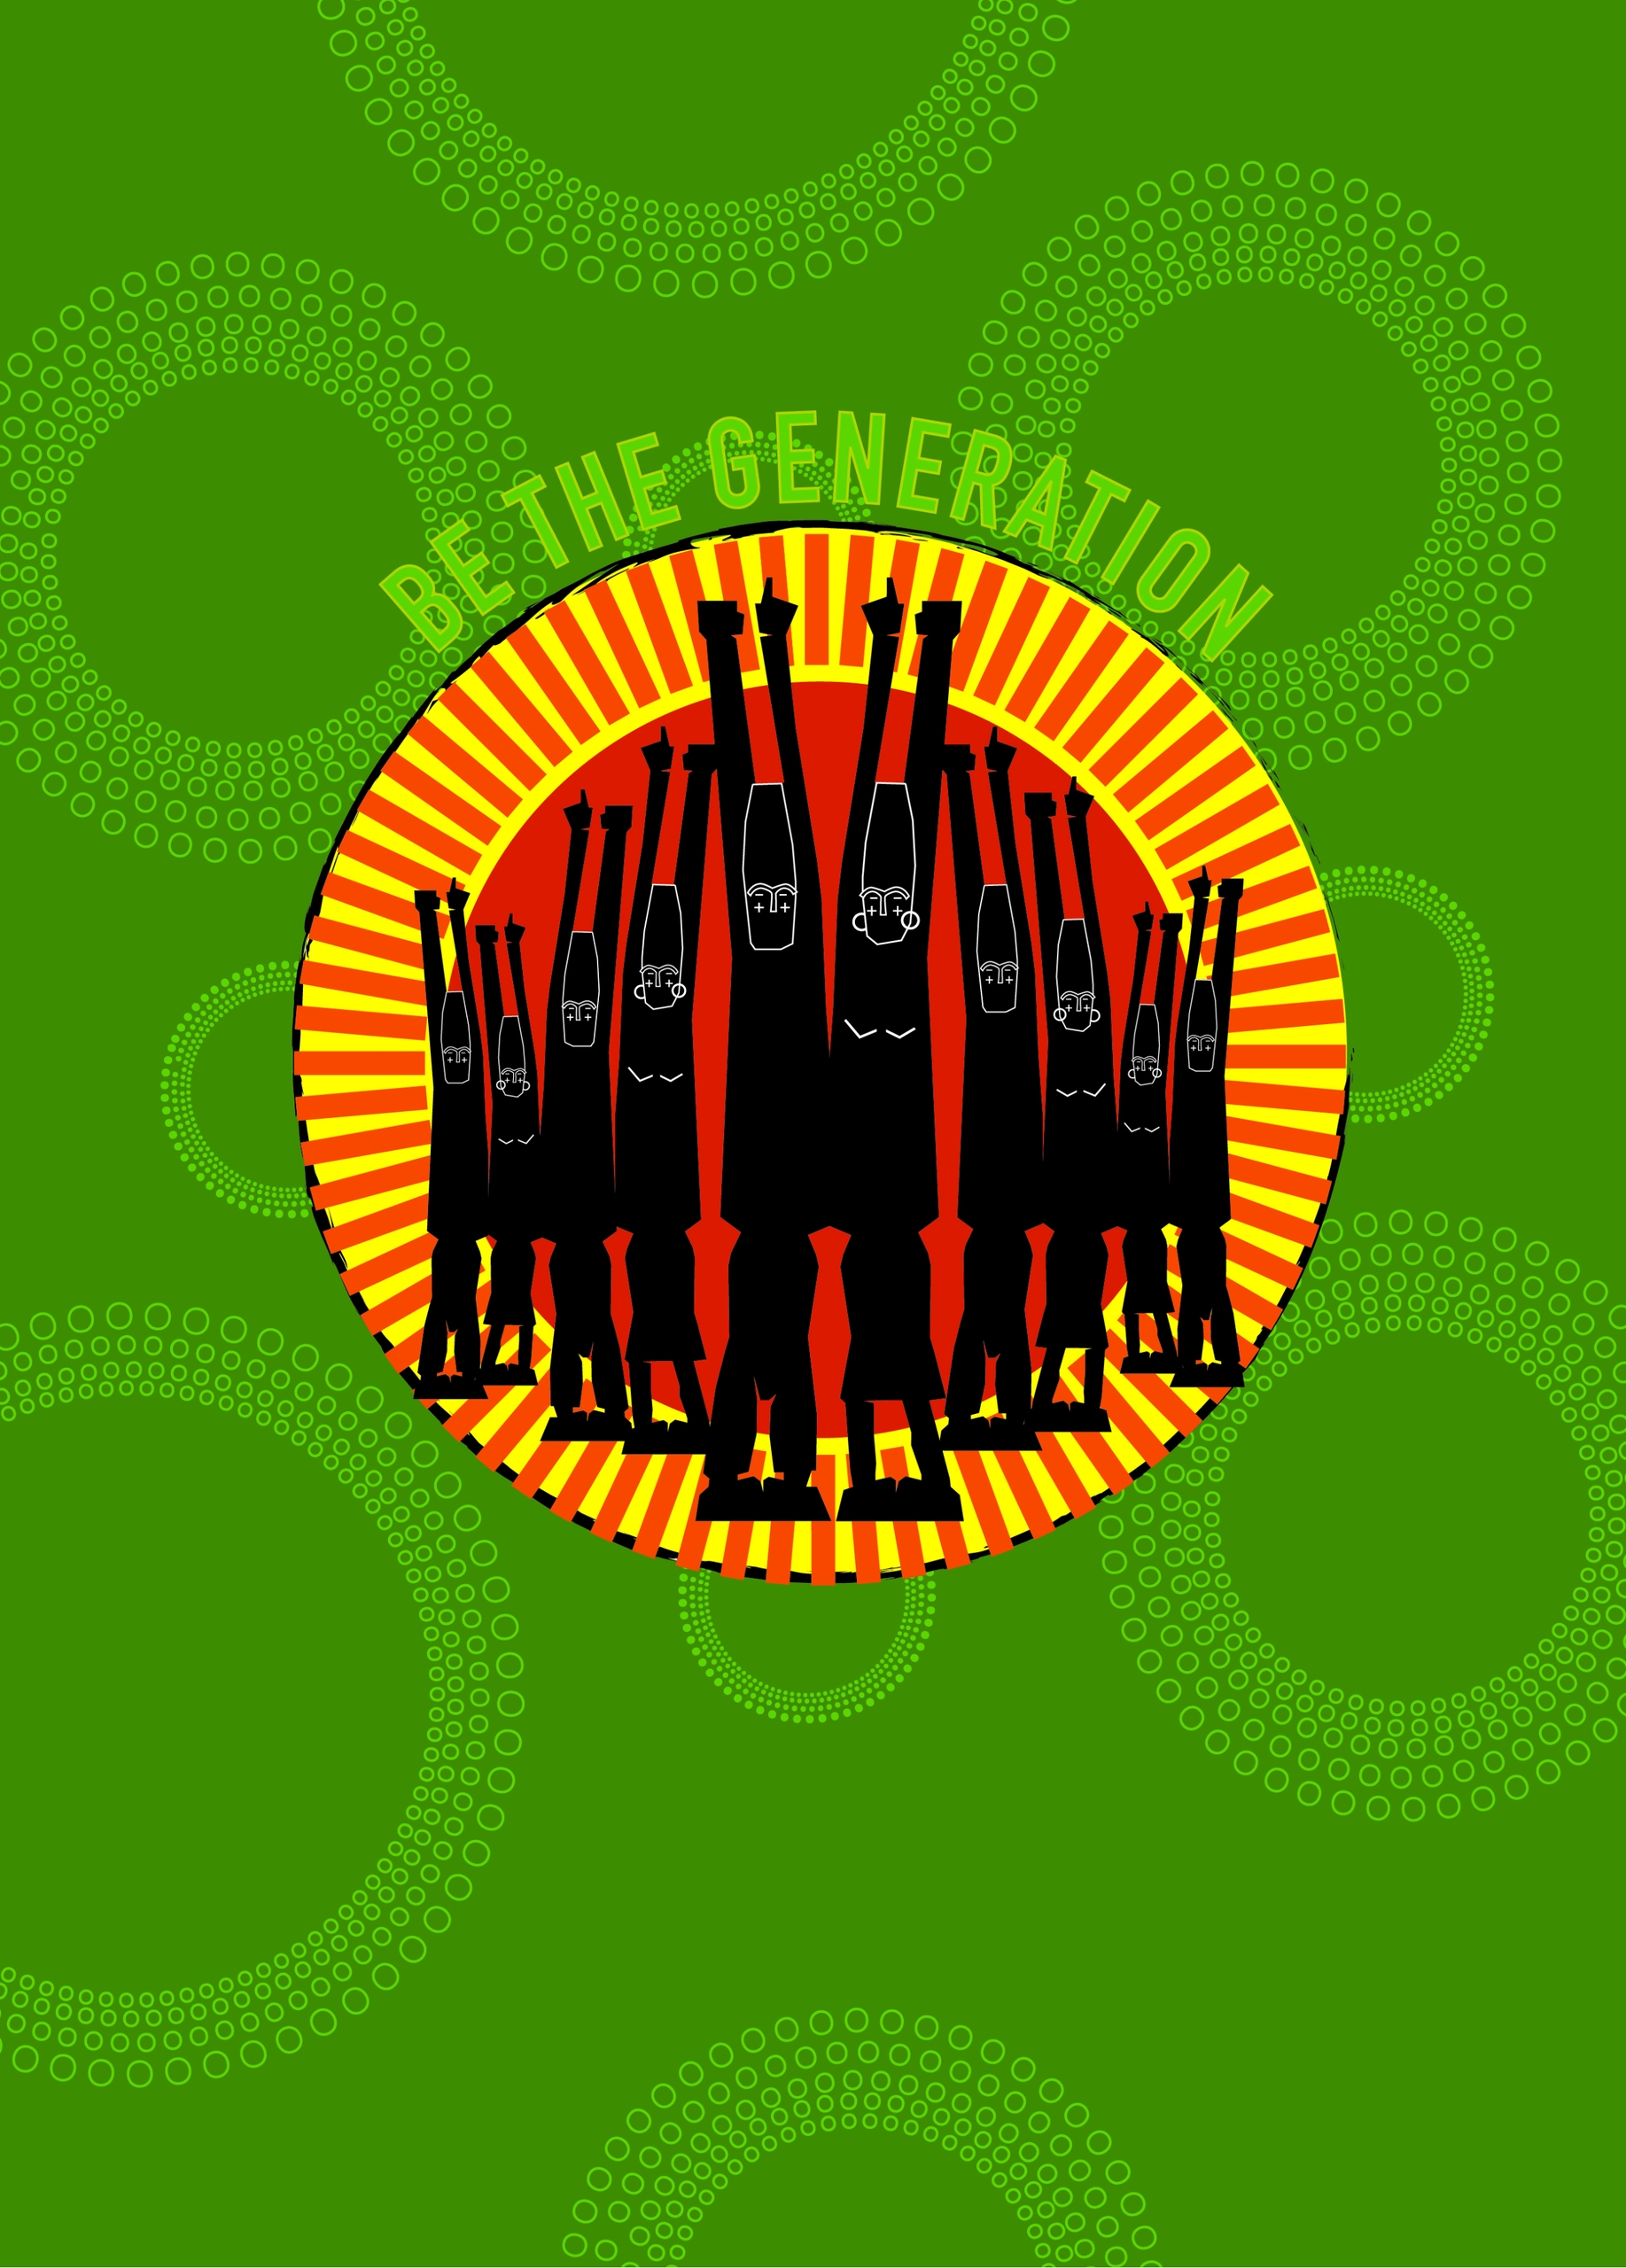 Be the Generation Global Citizen submission by @heloiseb